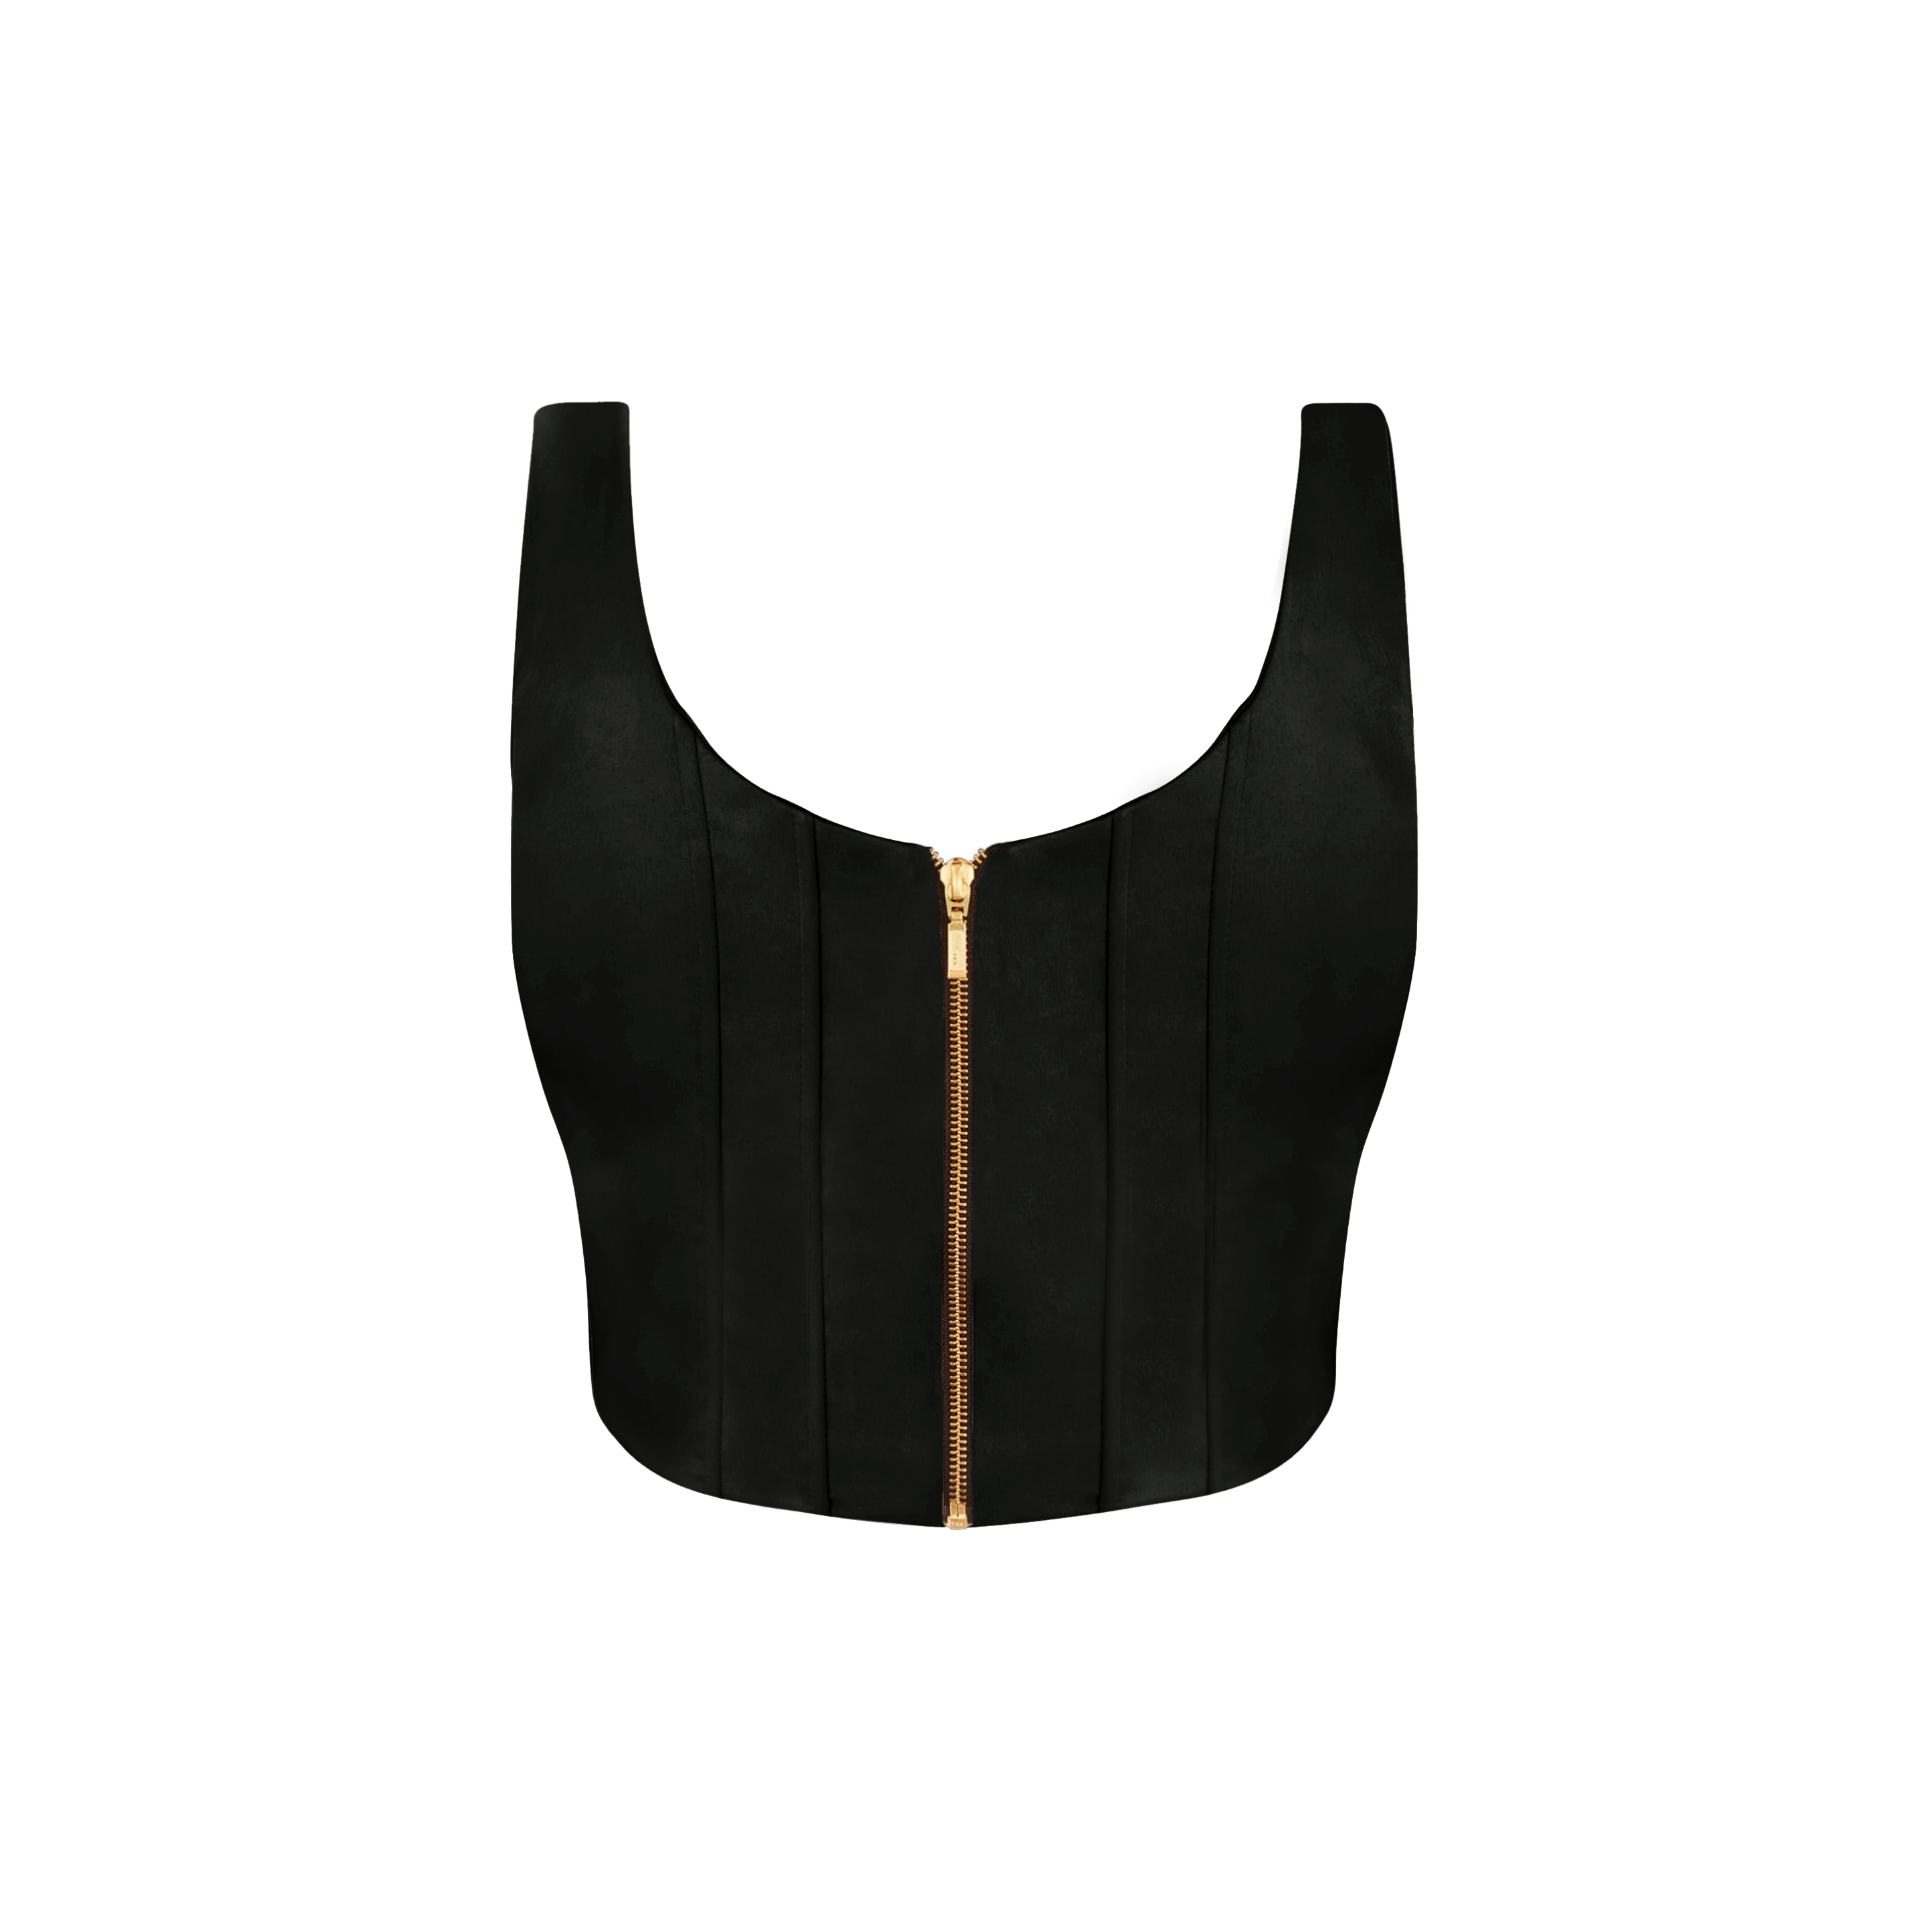 Silence + Noise Black Tube Top  Built in Bra Size M - $14 (68% Off Retail)  - From Alyssa